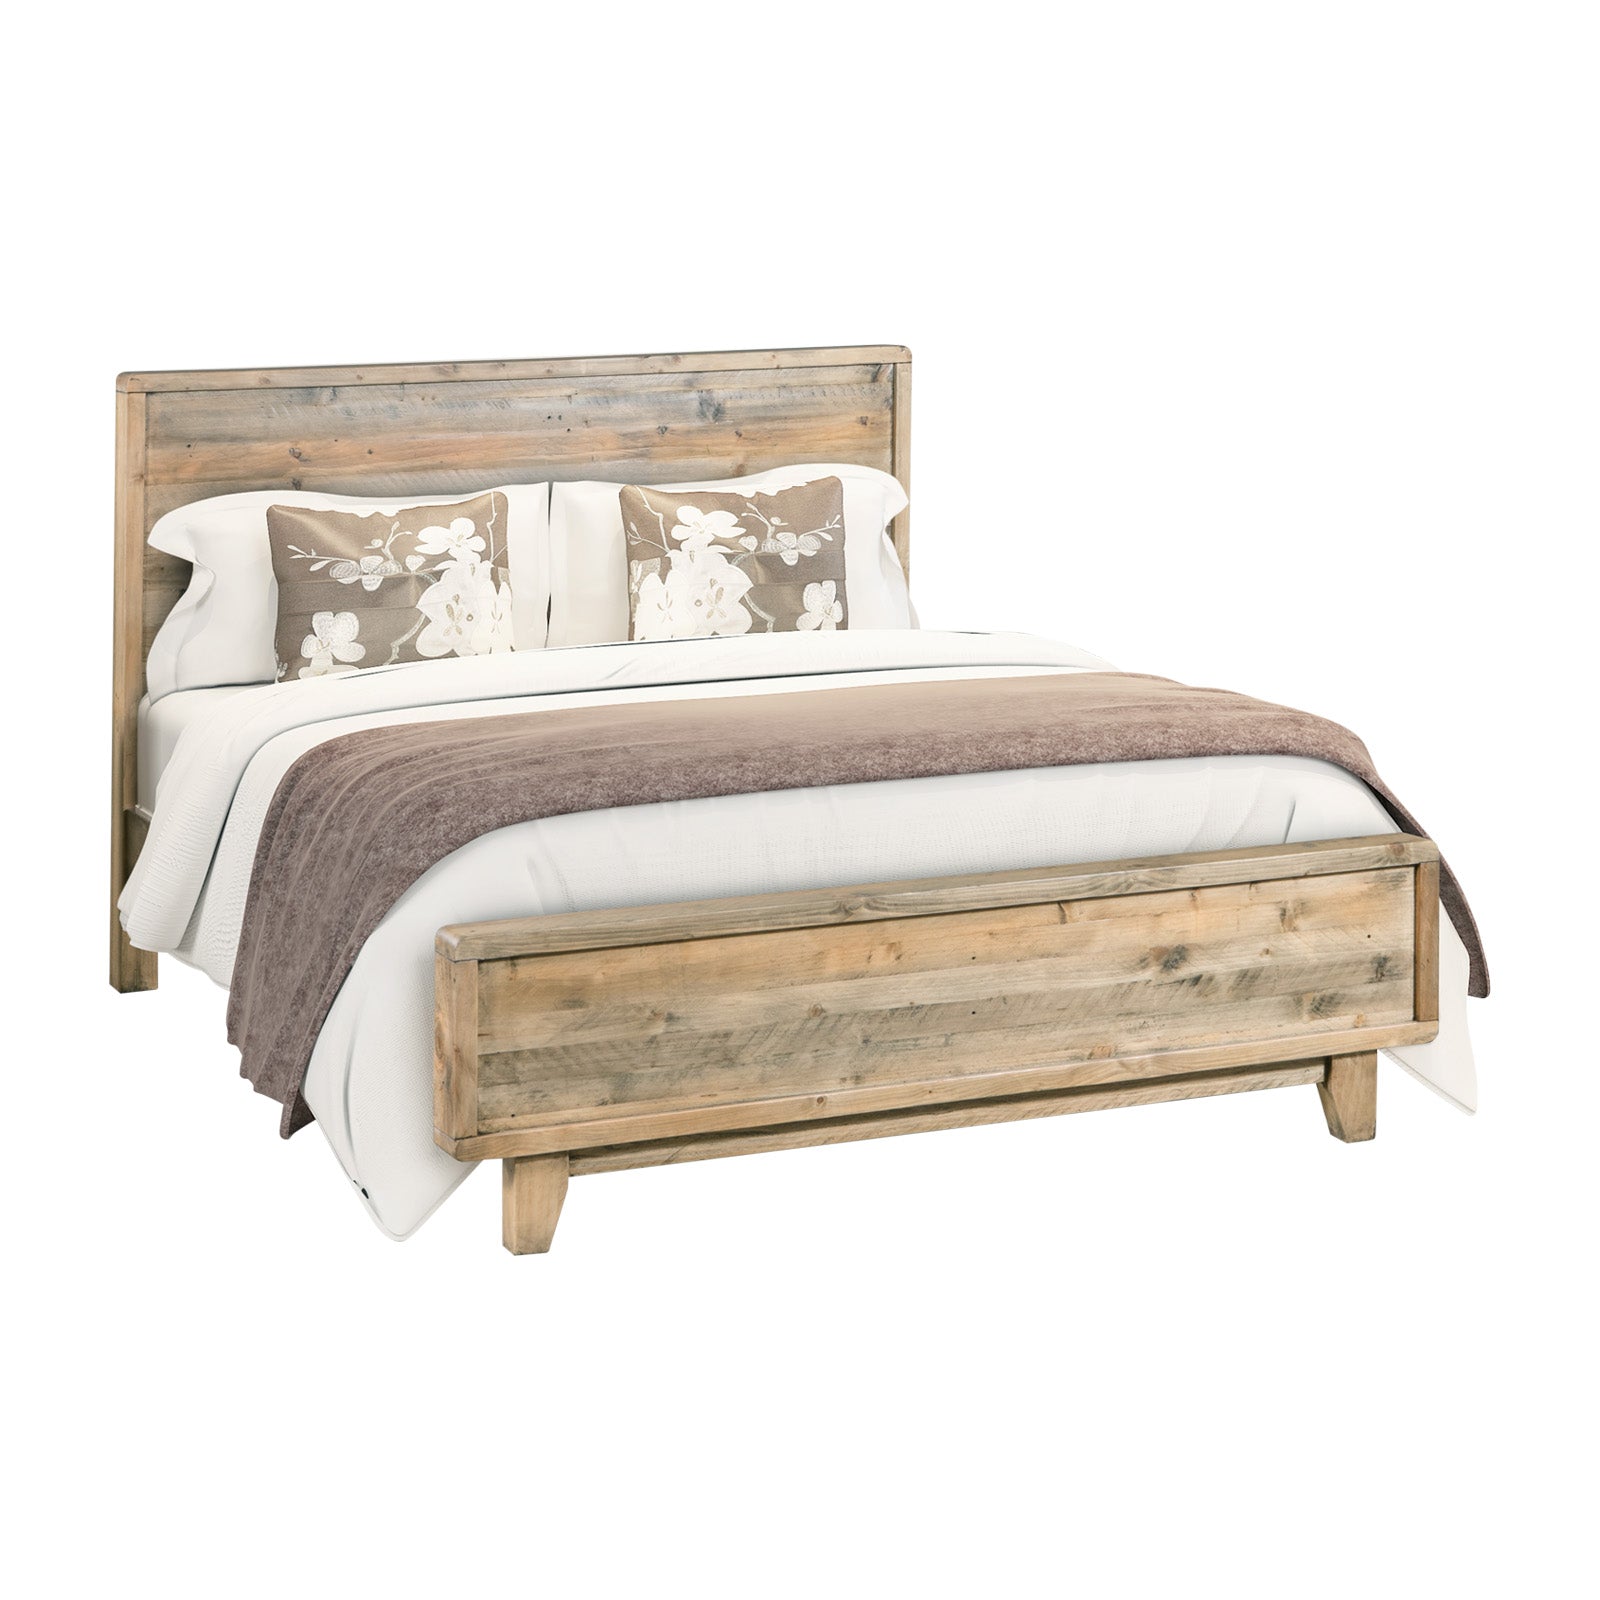 Queen Size Bed Frame - Rustic Charm, Modern Design Solid Pine